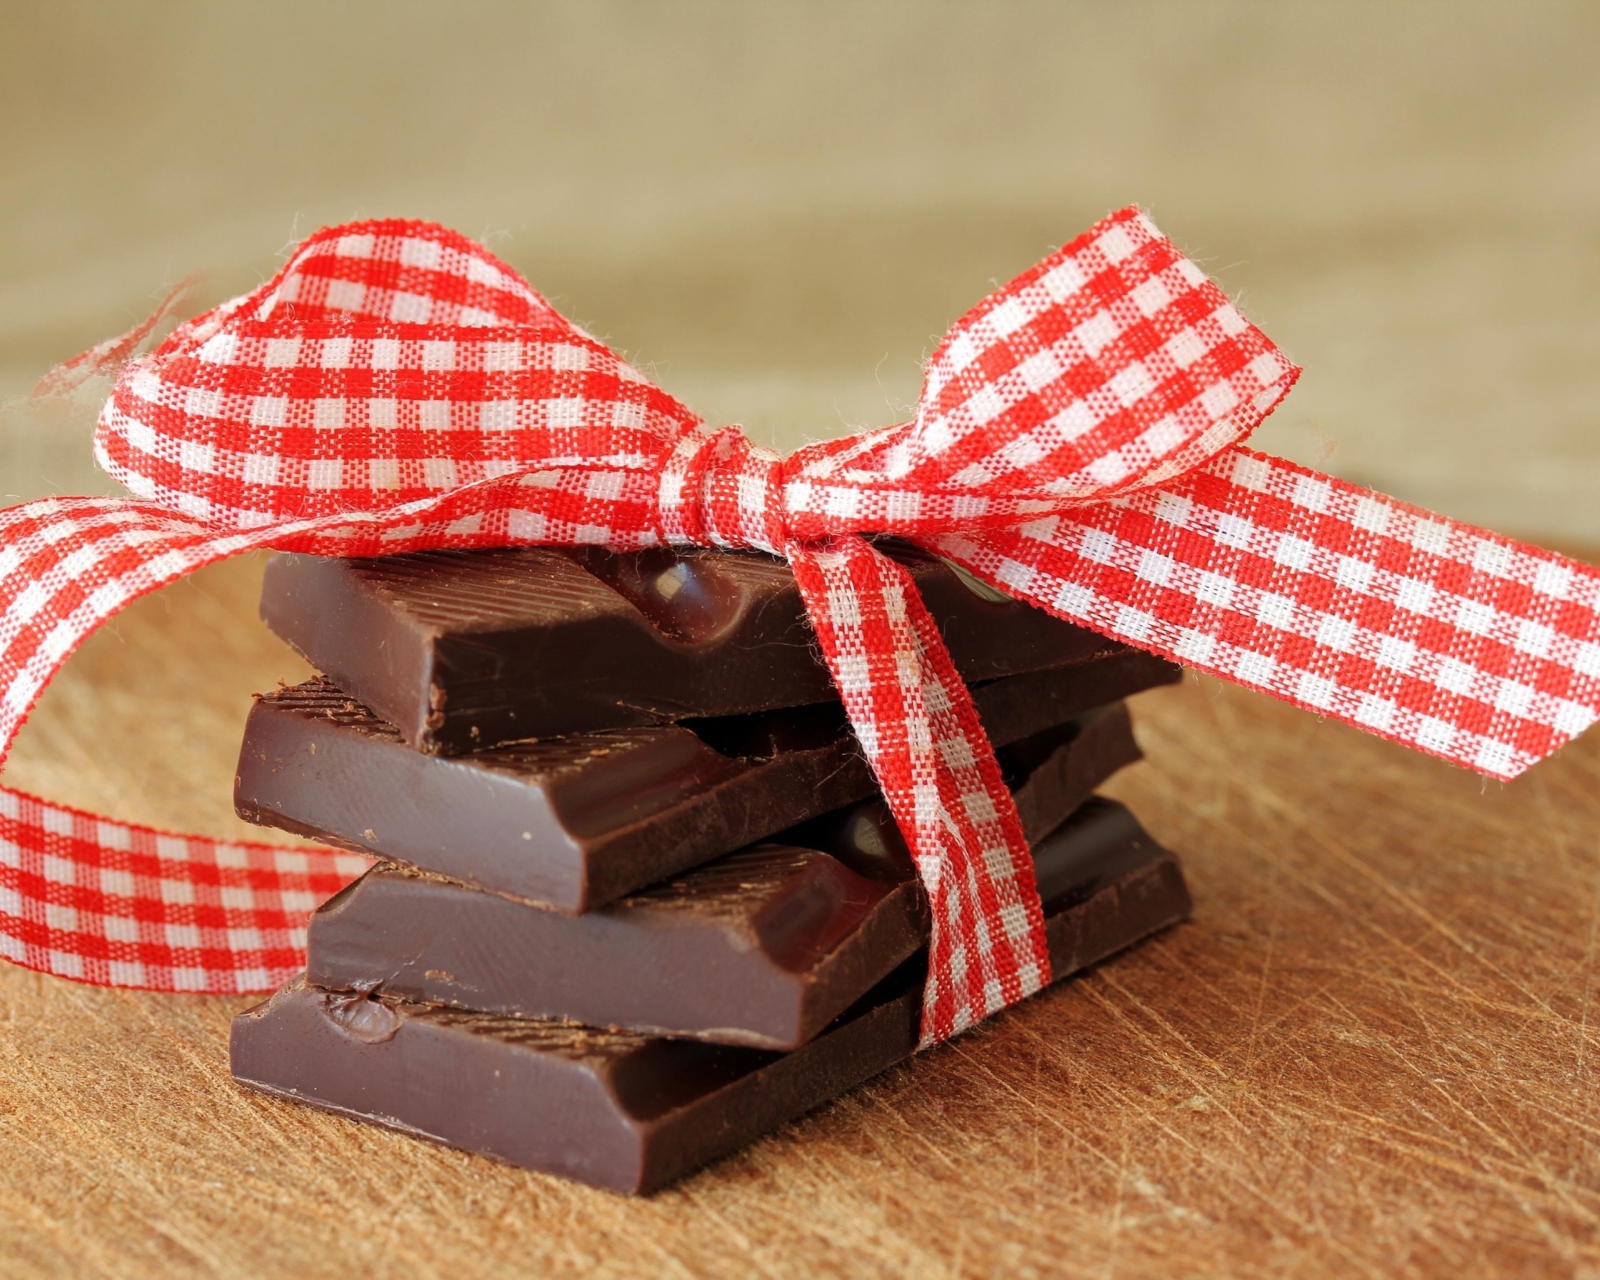 Chocolate And Red Bow wallpaper 1600x1280